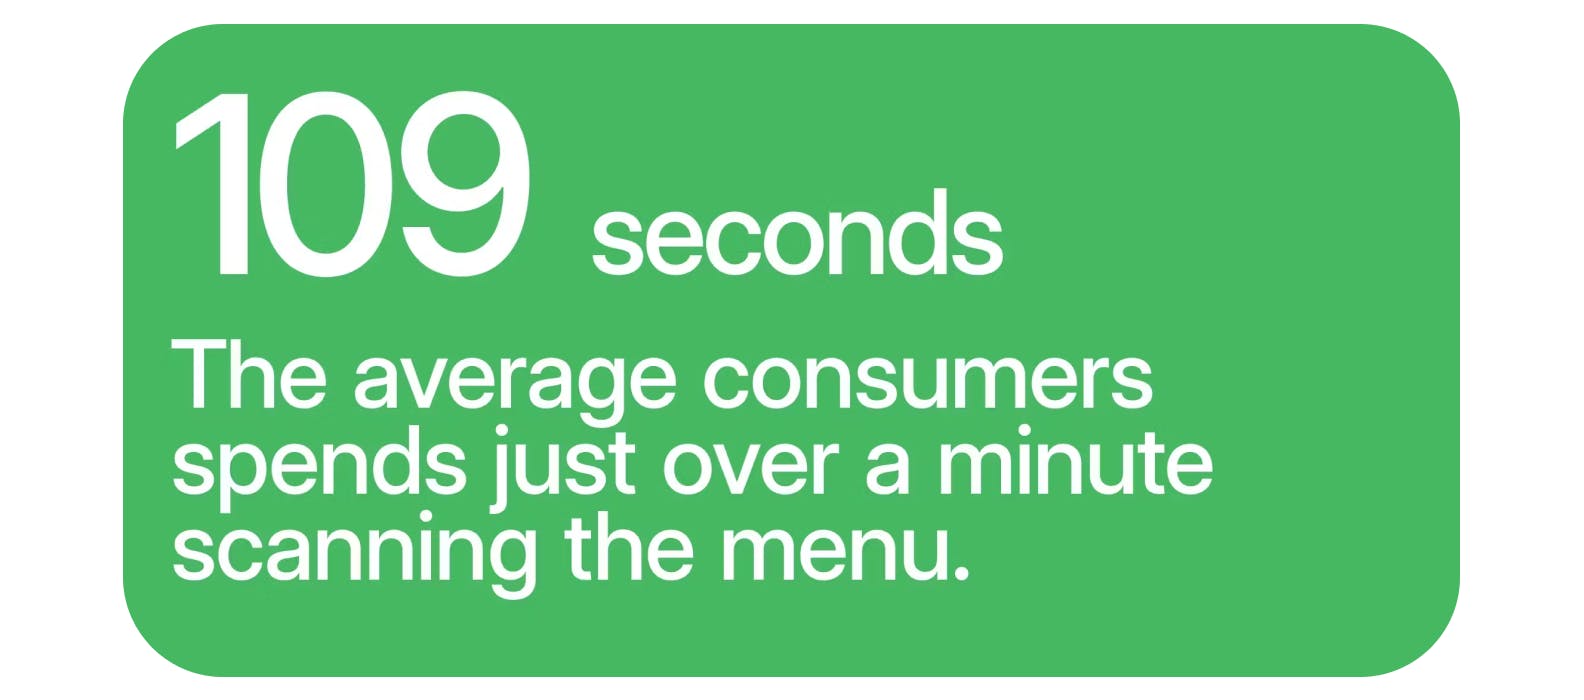 109 seconds—The average consumer spends just over a minute scanning the menu.